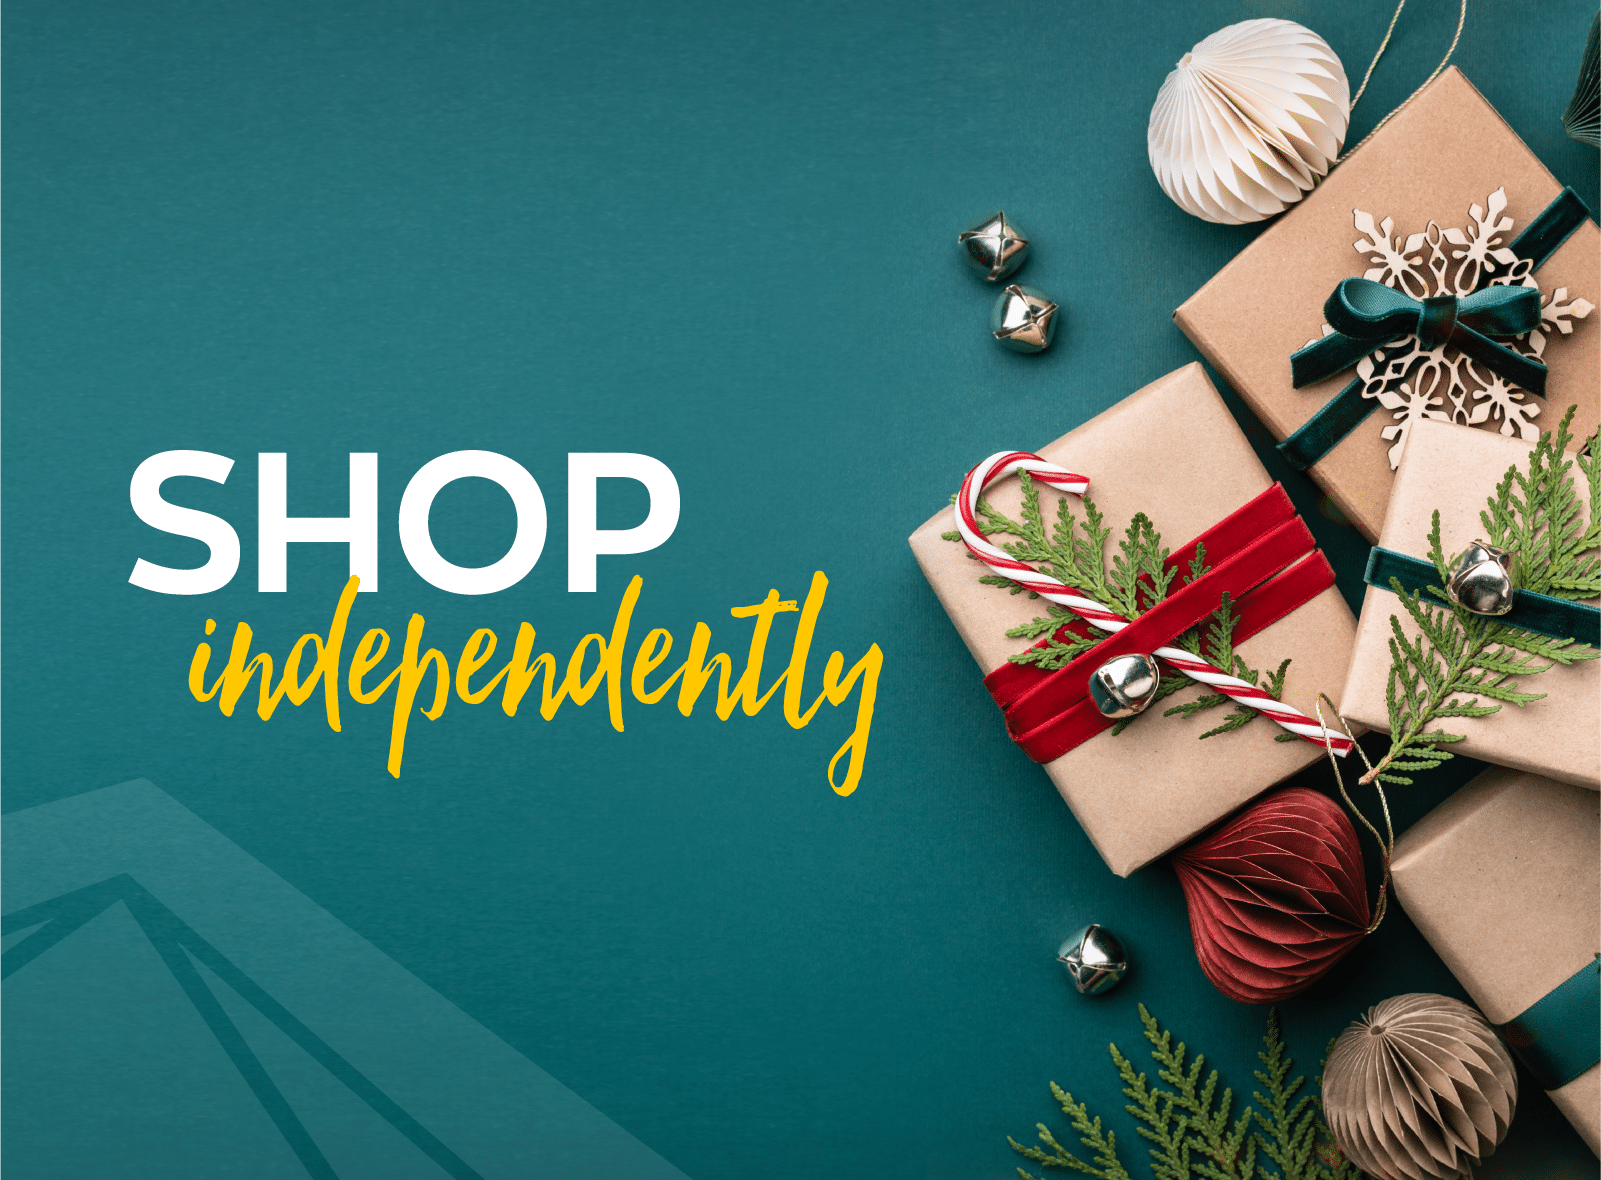 Shop independently this (and every) Christmas